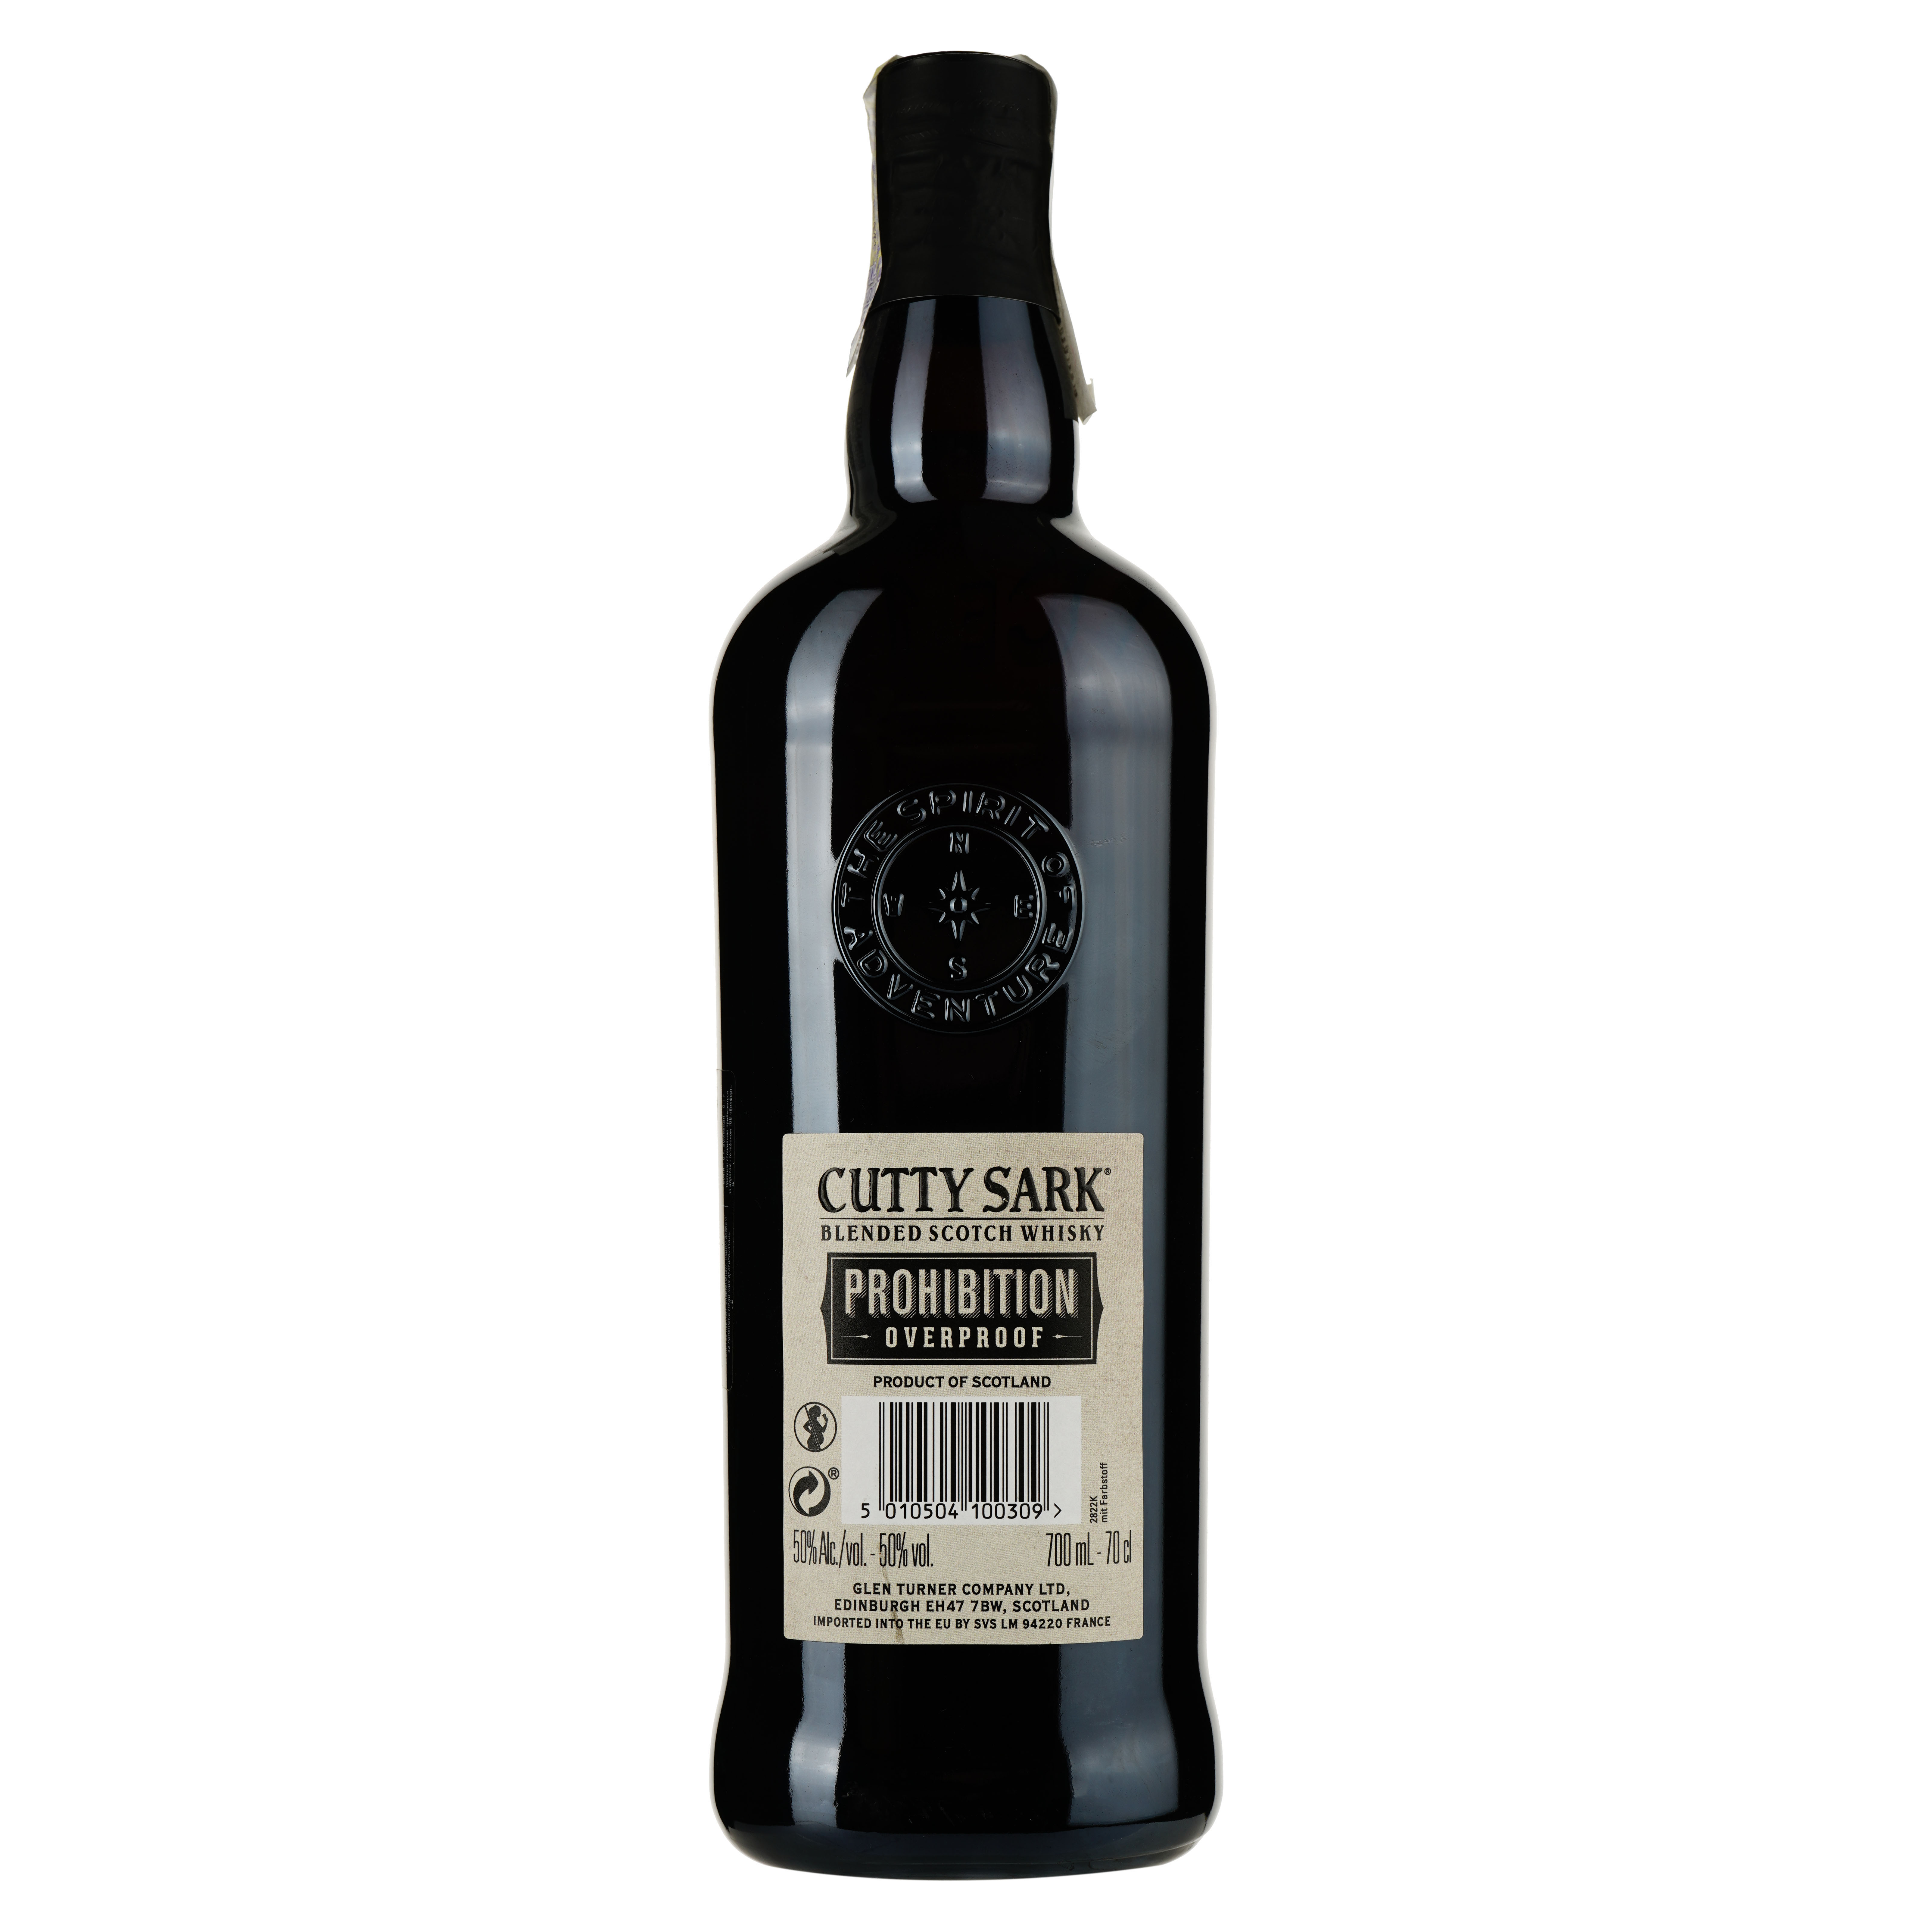 Виски Cutty Sark Prohibition Blended Scotch Whisky 50% 0.7 л - фото 2